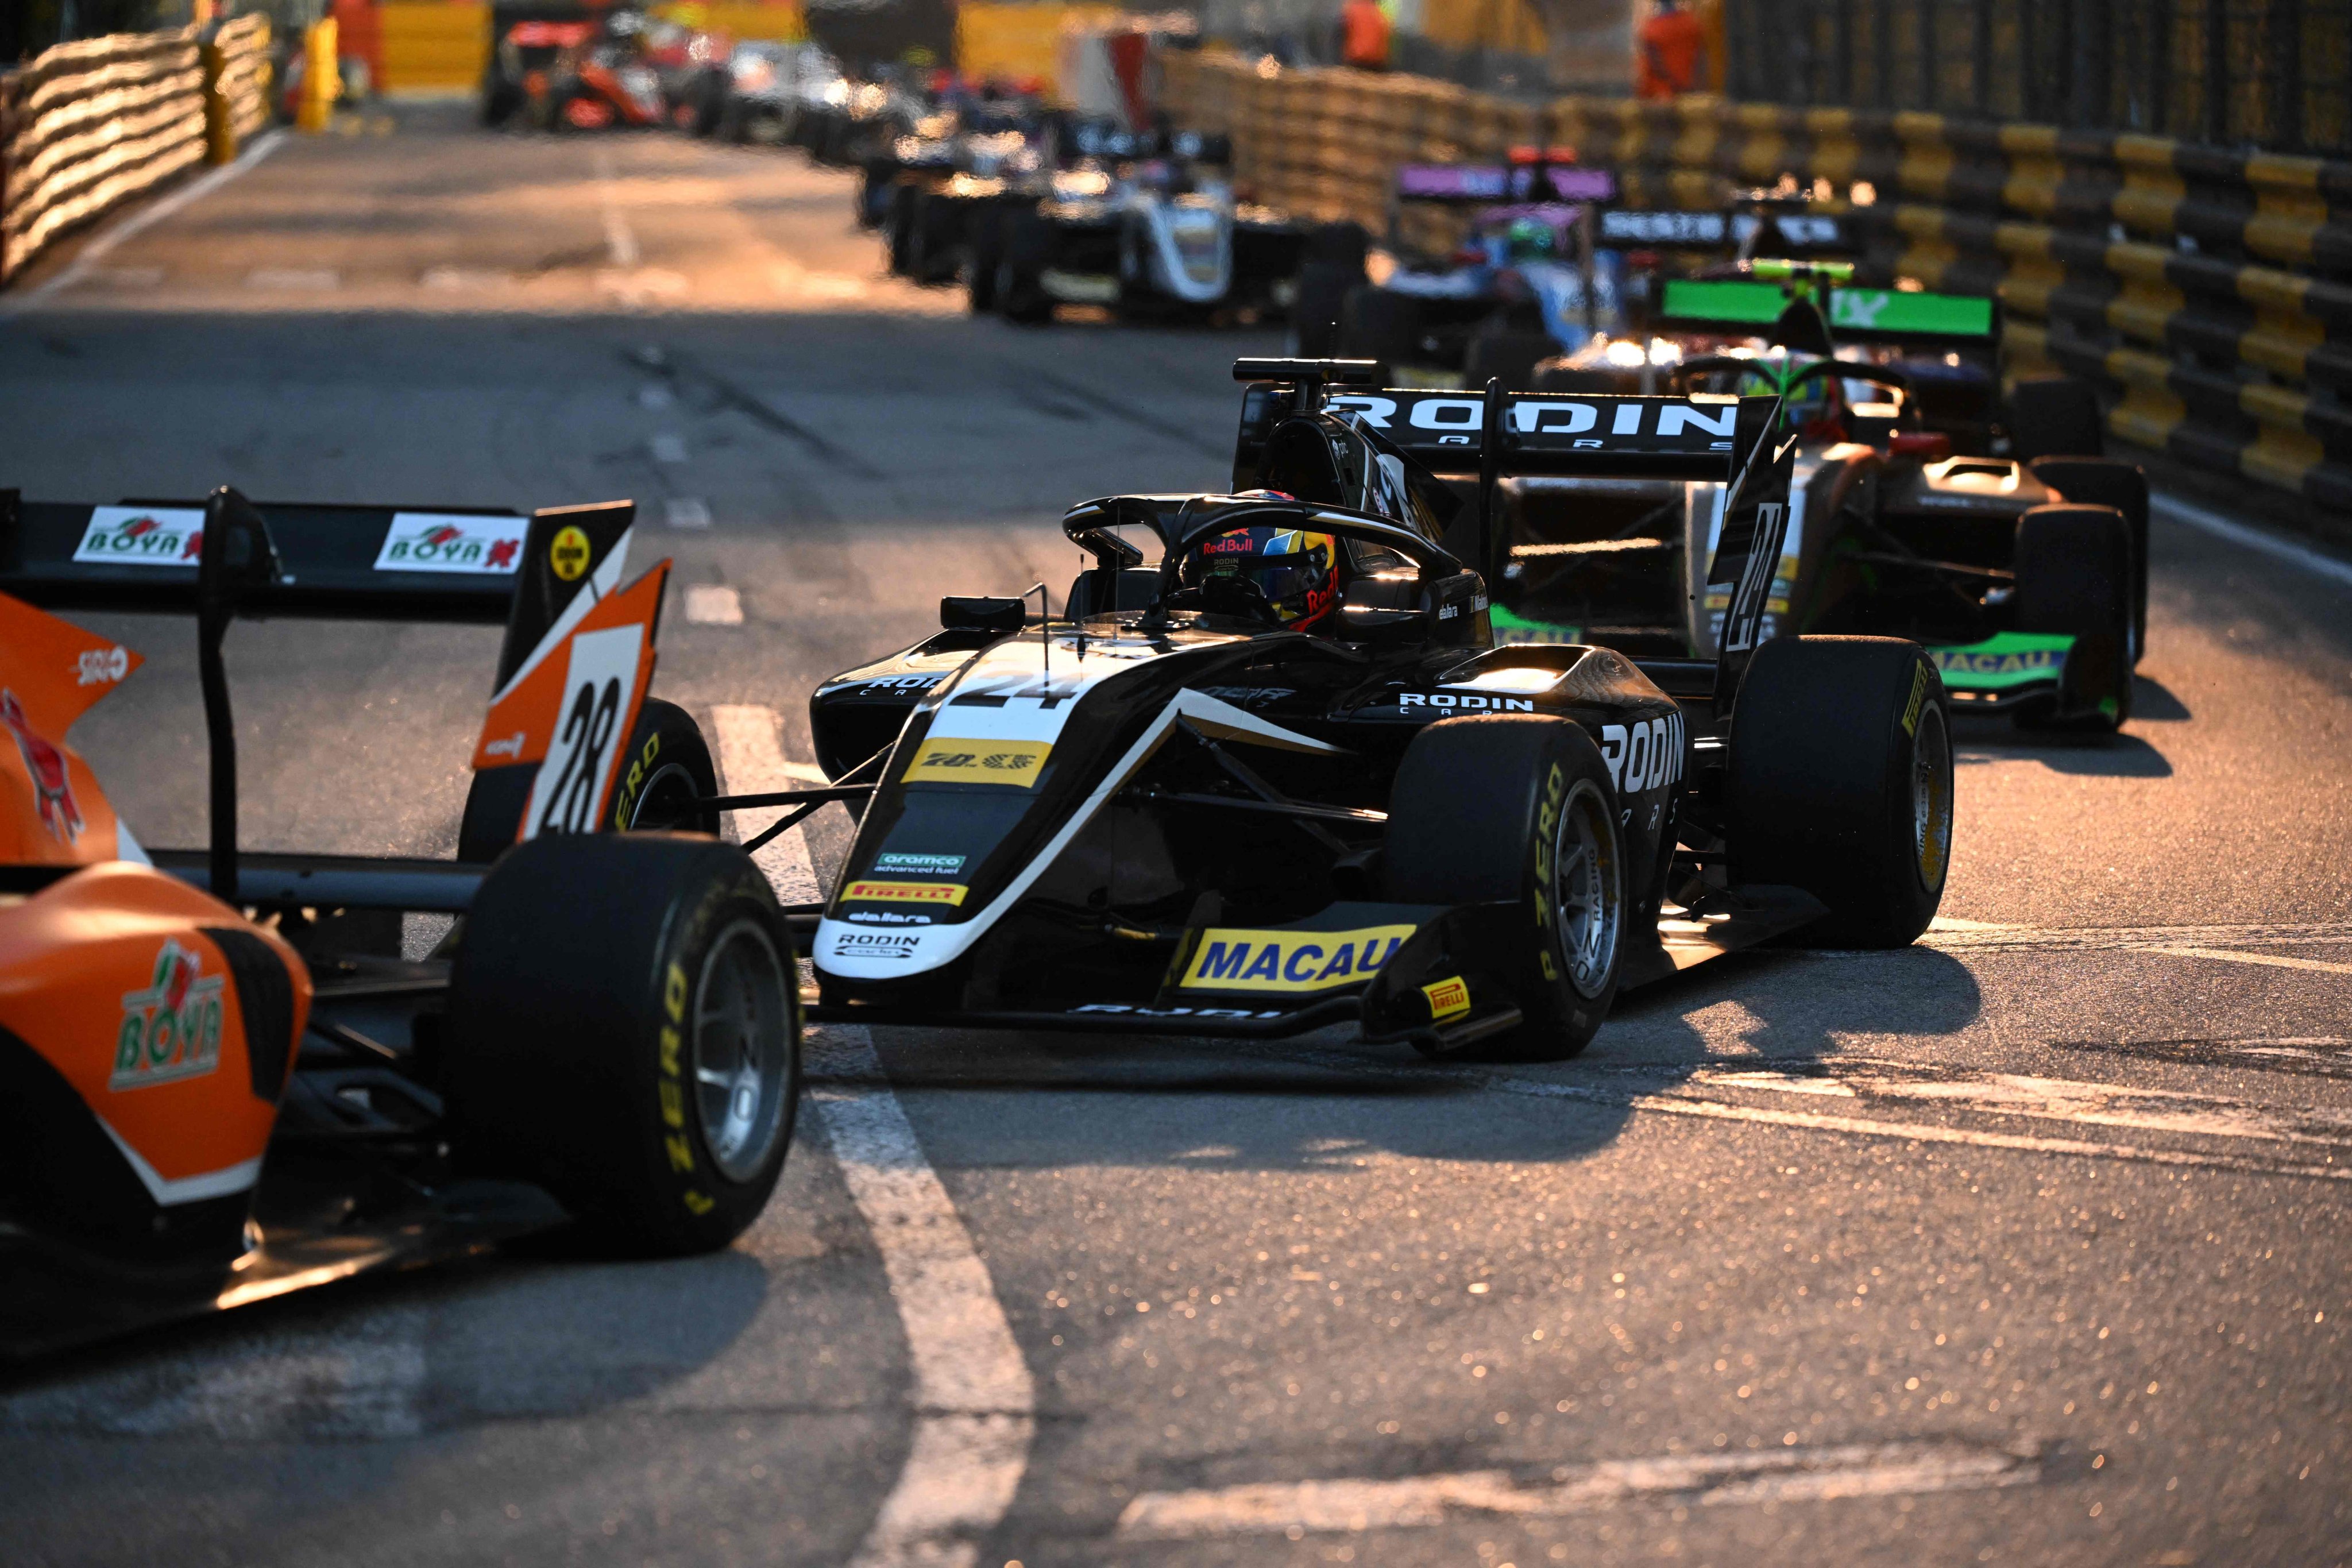 Drivers start the Formula 3 qualifying race at the 70th Macau Grand Prix on Saturday. Photo: AFP